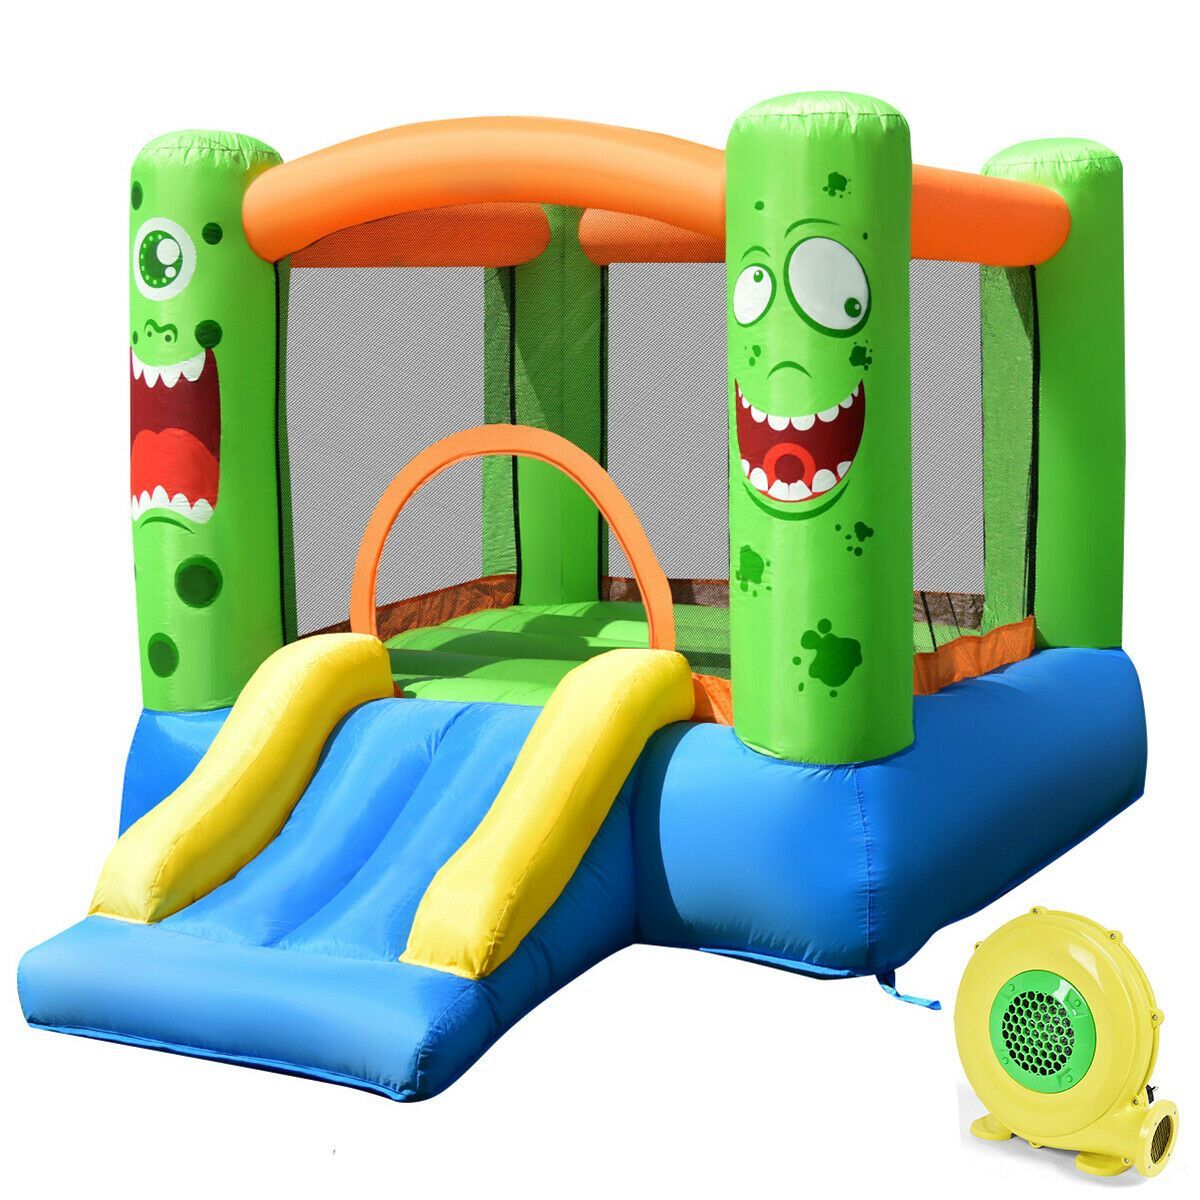 Costway Kids Playing Inflatable Bounce House Jumping Castle Game Fun Slider 480W Blower | Target